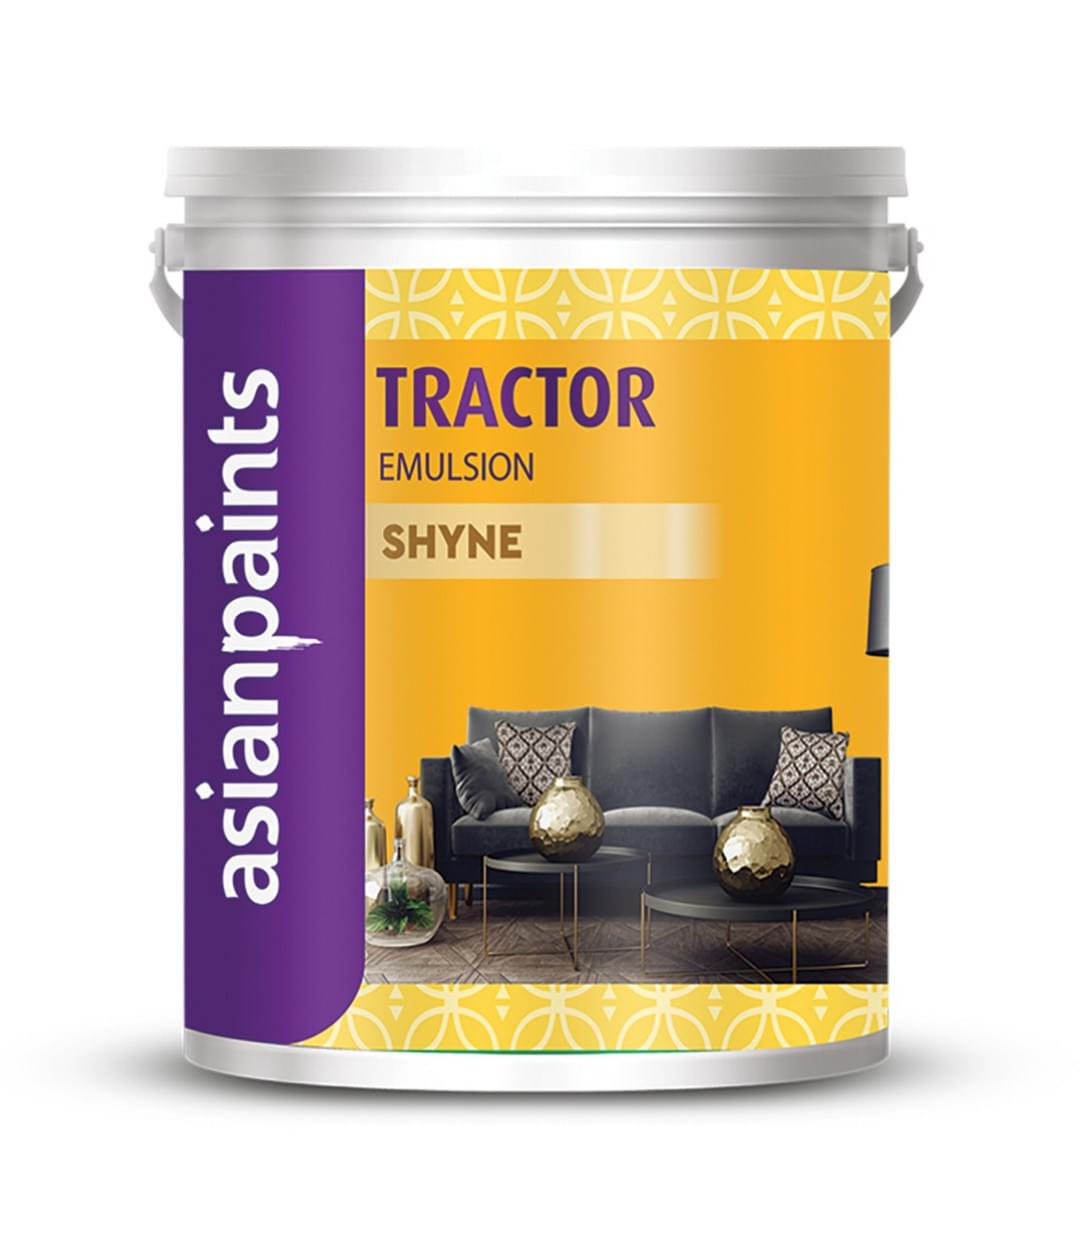 Tractor Emulsion Shyne from Asian Paints